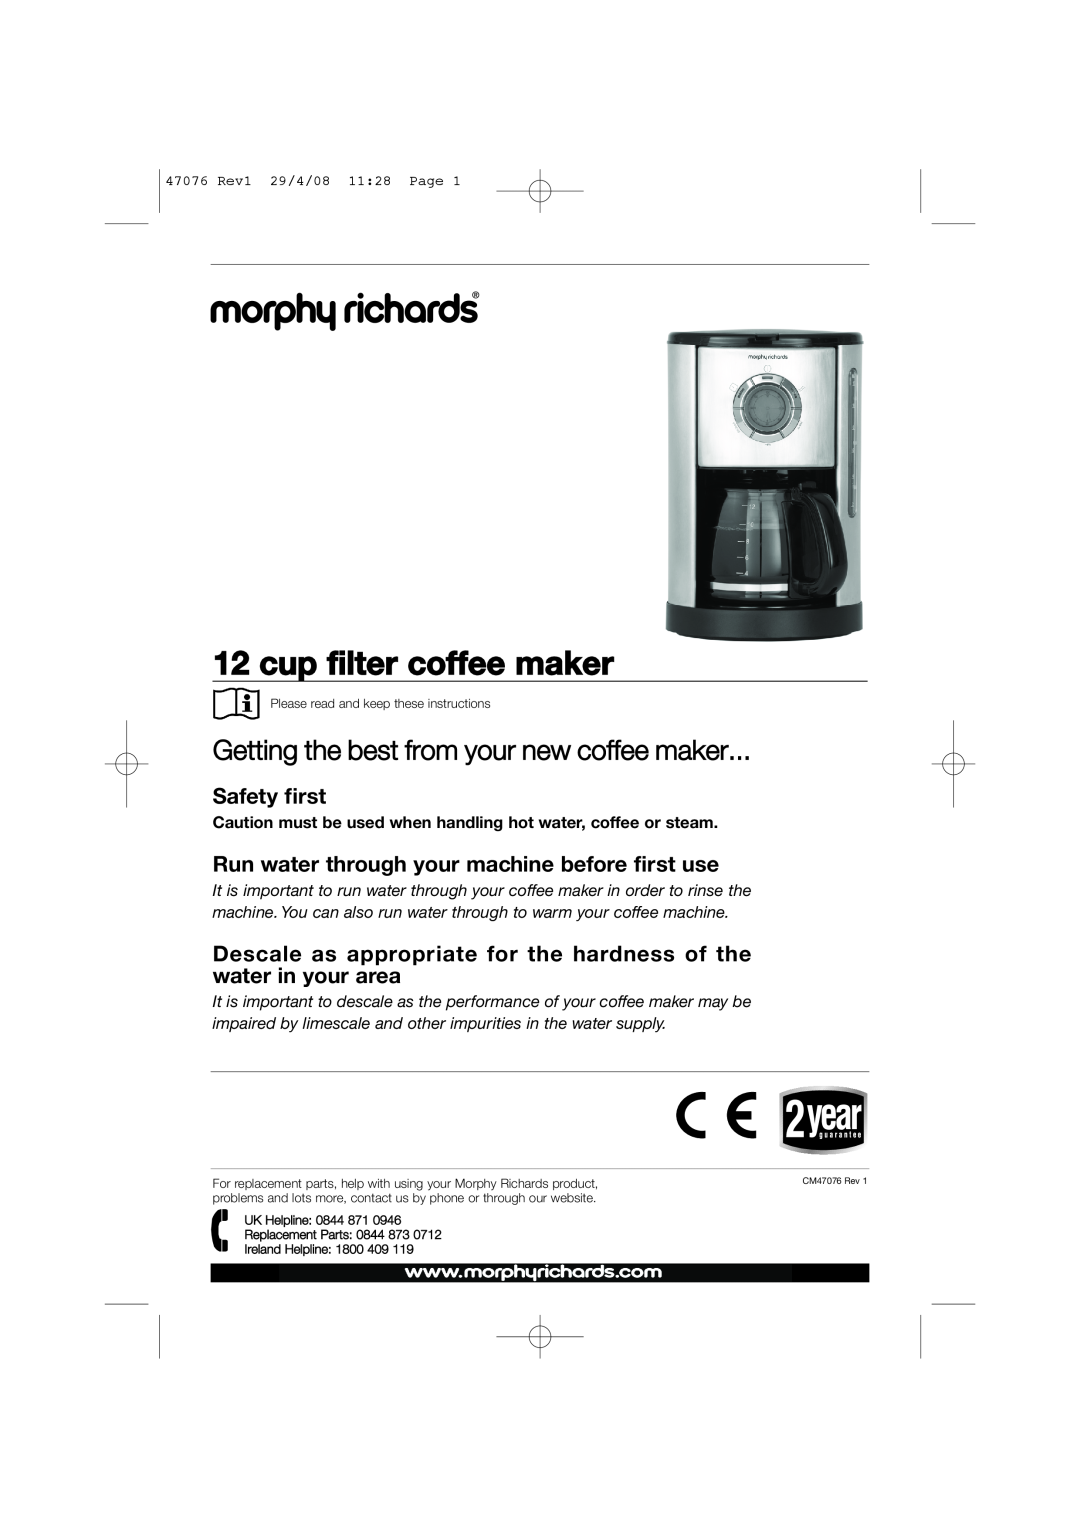 Morphy Richards 47076 manual Caution must be used when handling hot water, coffee or steam, cup filter coffee maker 